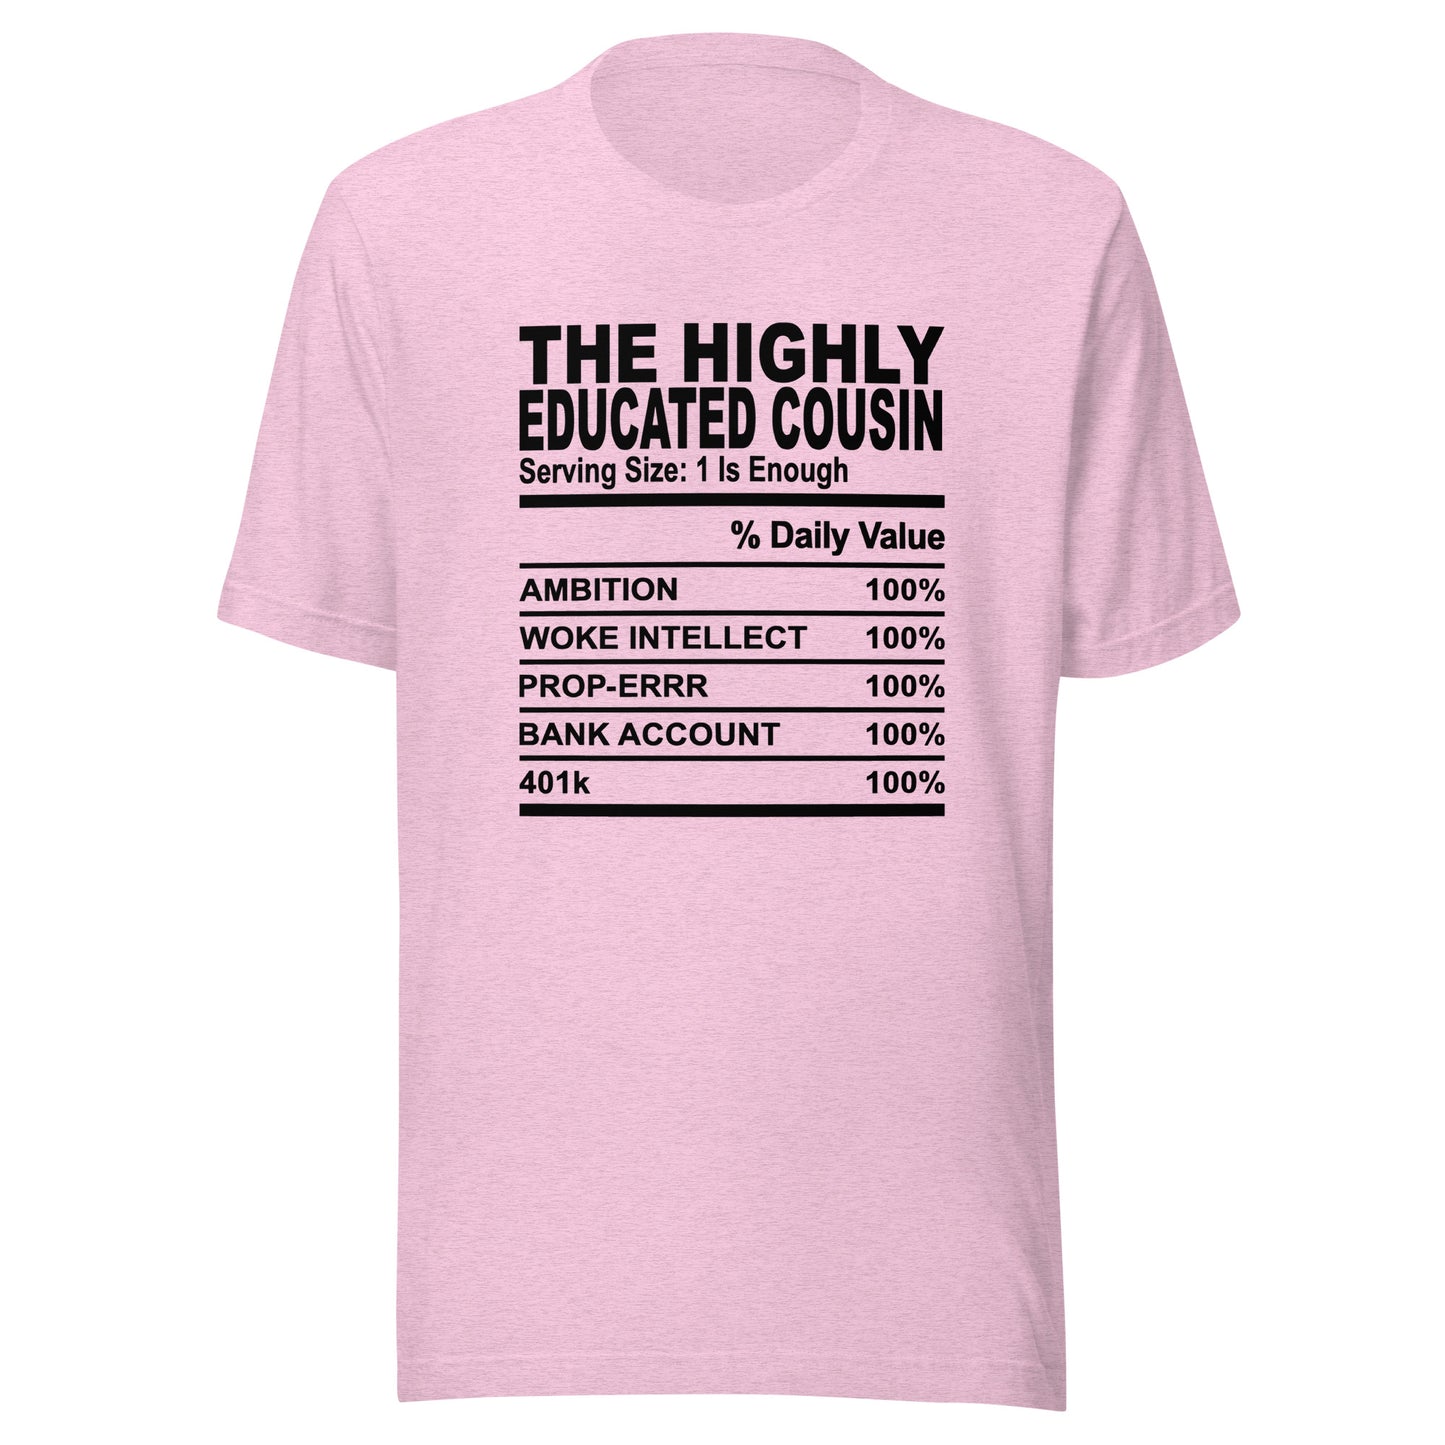 THE HIGHLY EDUCATED COUSIN - 2XL-3XL - Unisex T-Shirt (black print)